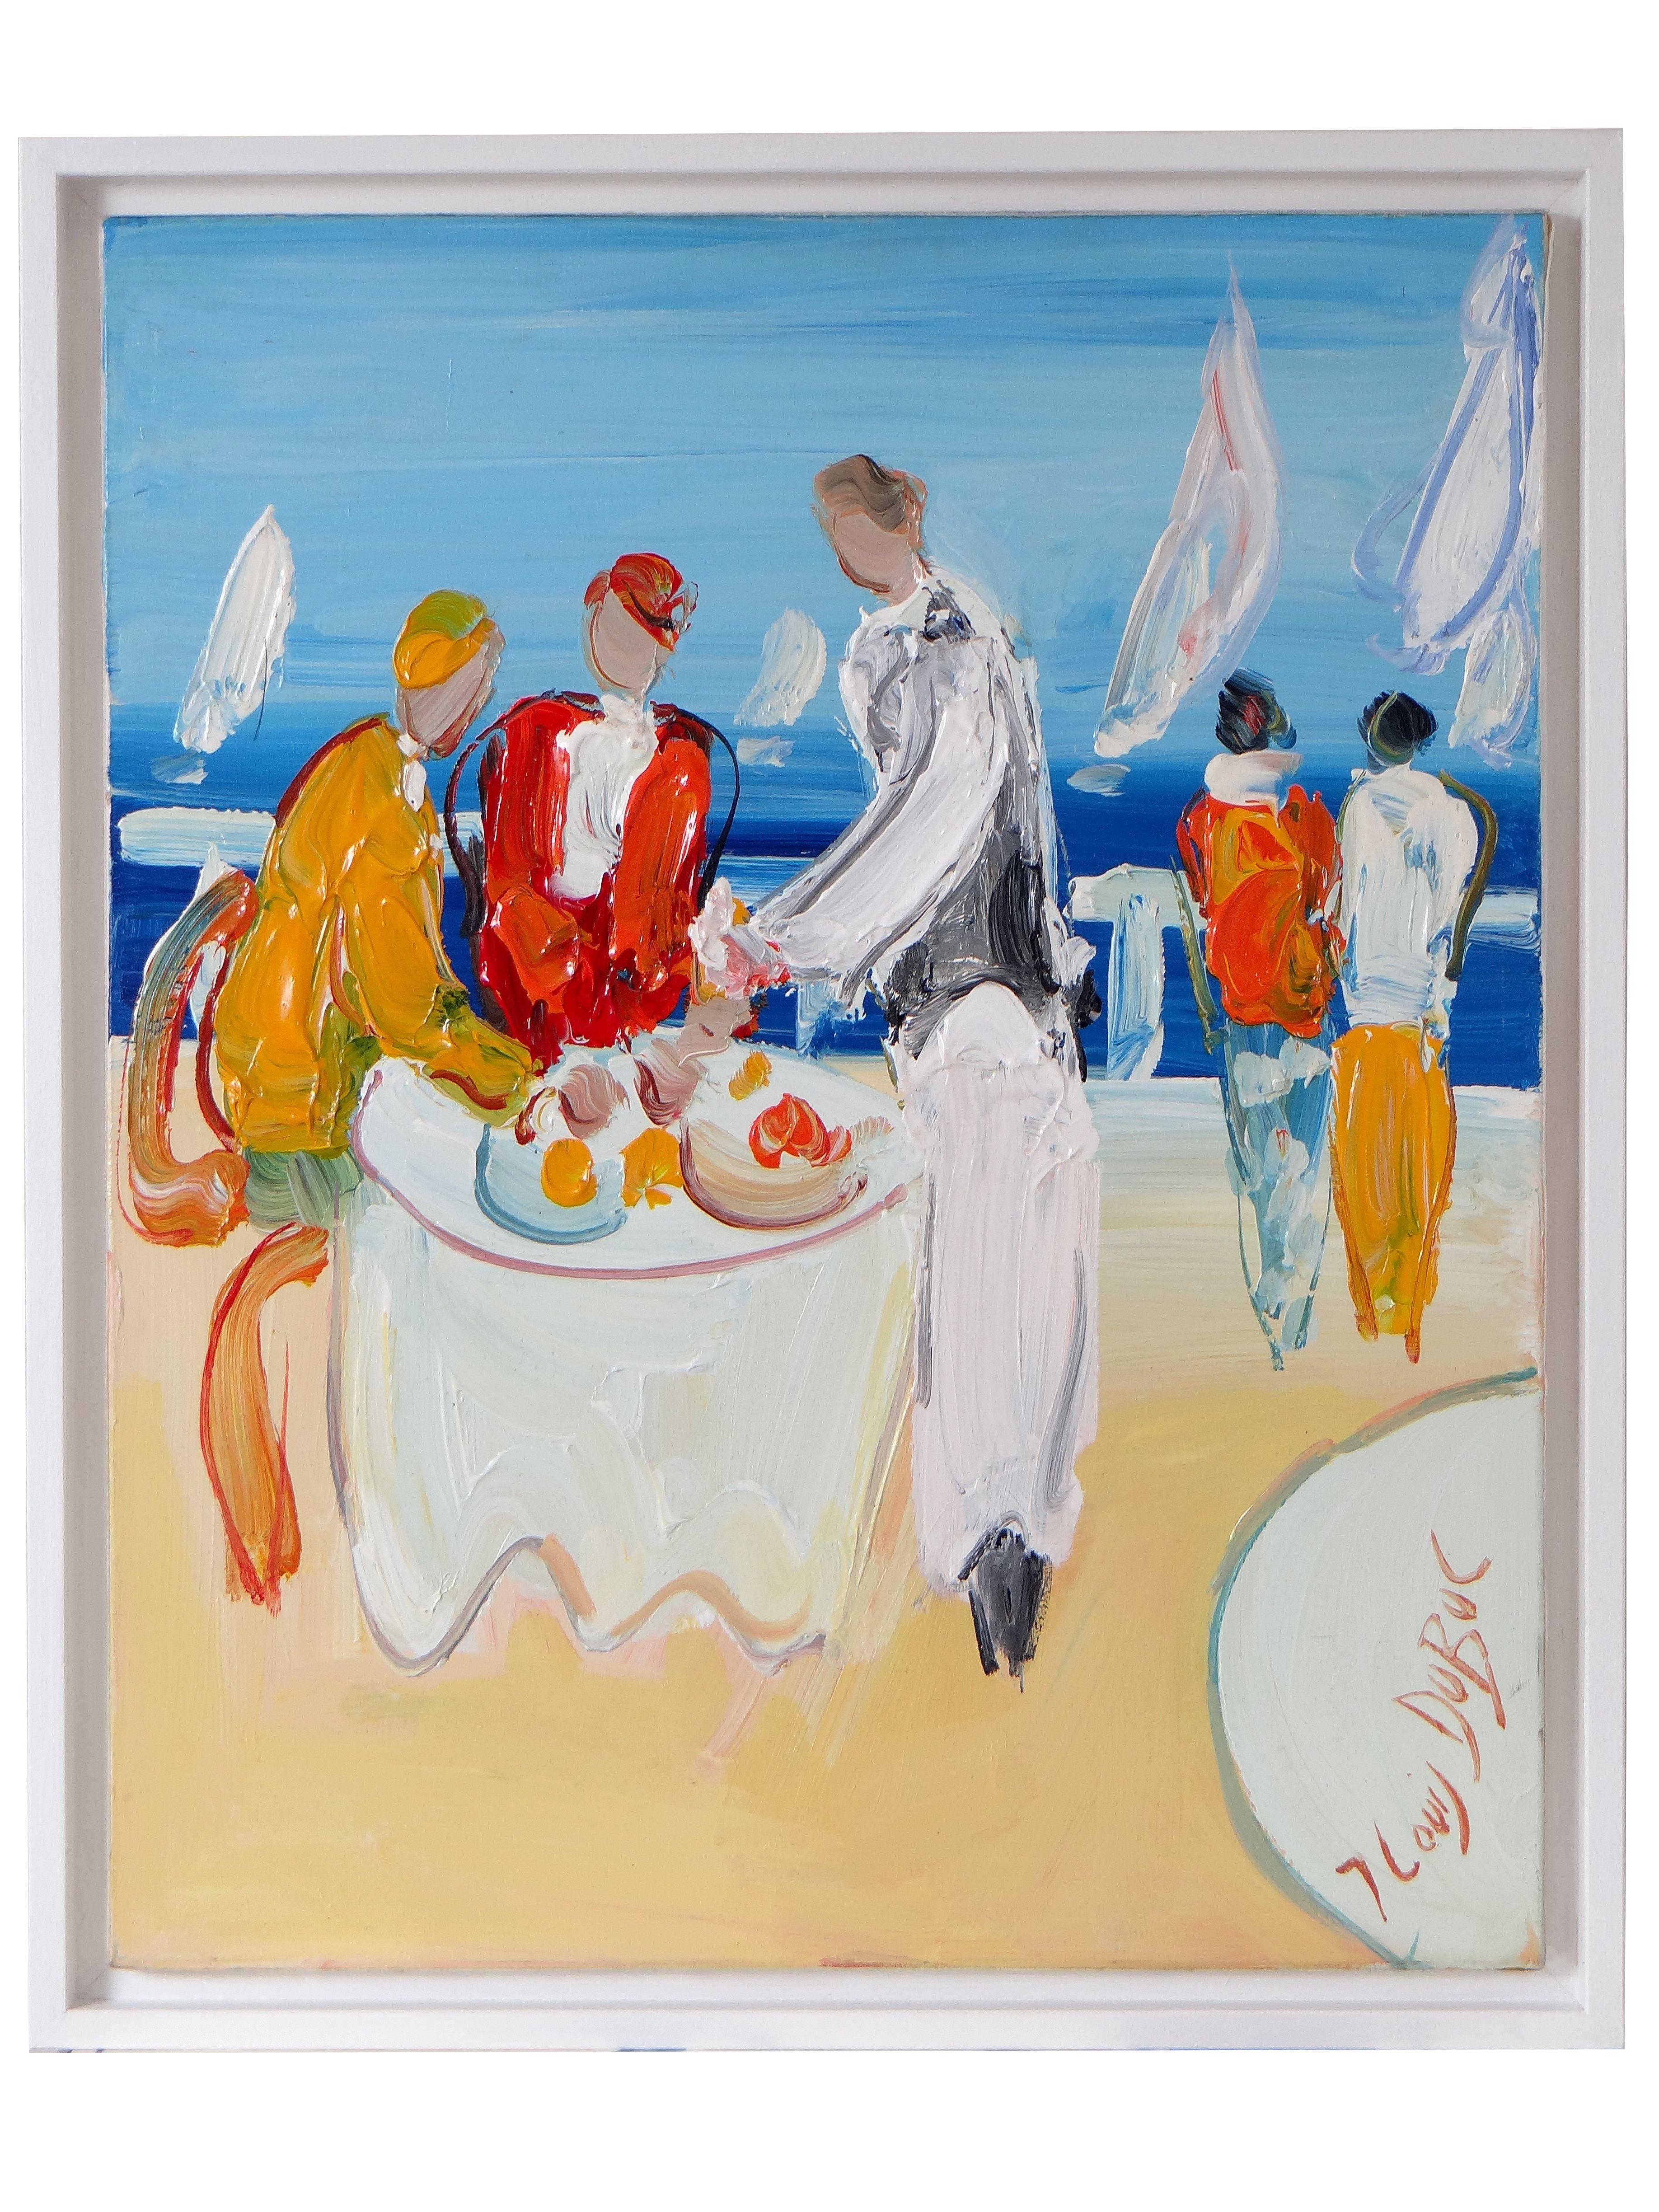 Dubuc Jean-Louis, born March 11, 1946 in Bordeaux. Studied at the Ecole des Beaux-Arts of the same city; student of Marty, decorator at the Paris Opera and the Grand Théâtre de Bordeaux. Admirer of Raoul DUFY for his mastery of the effects of light